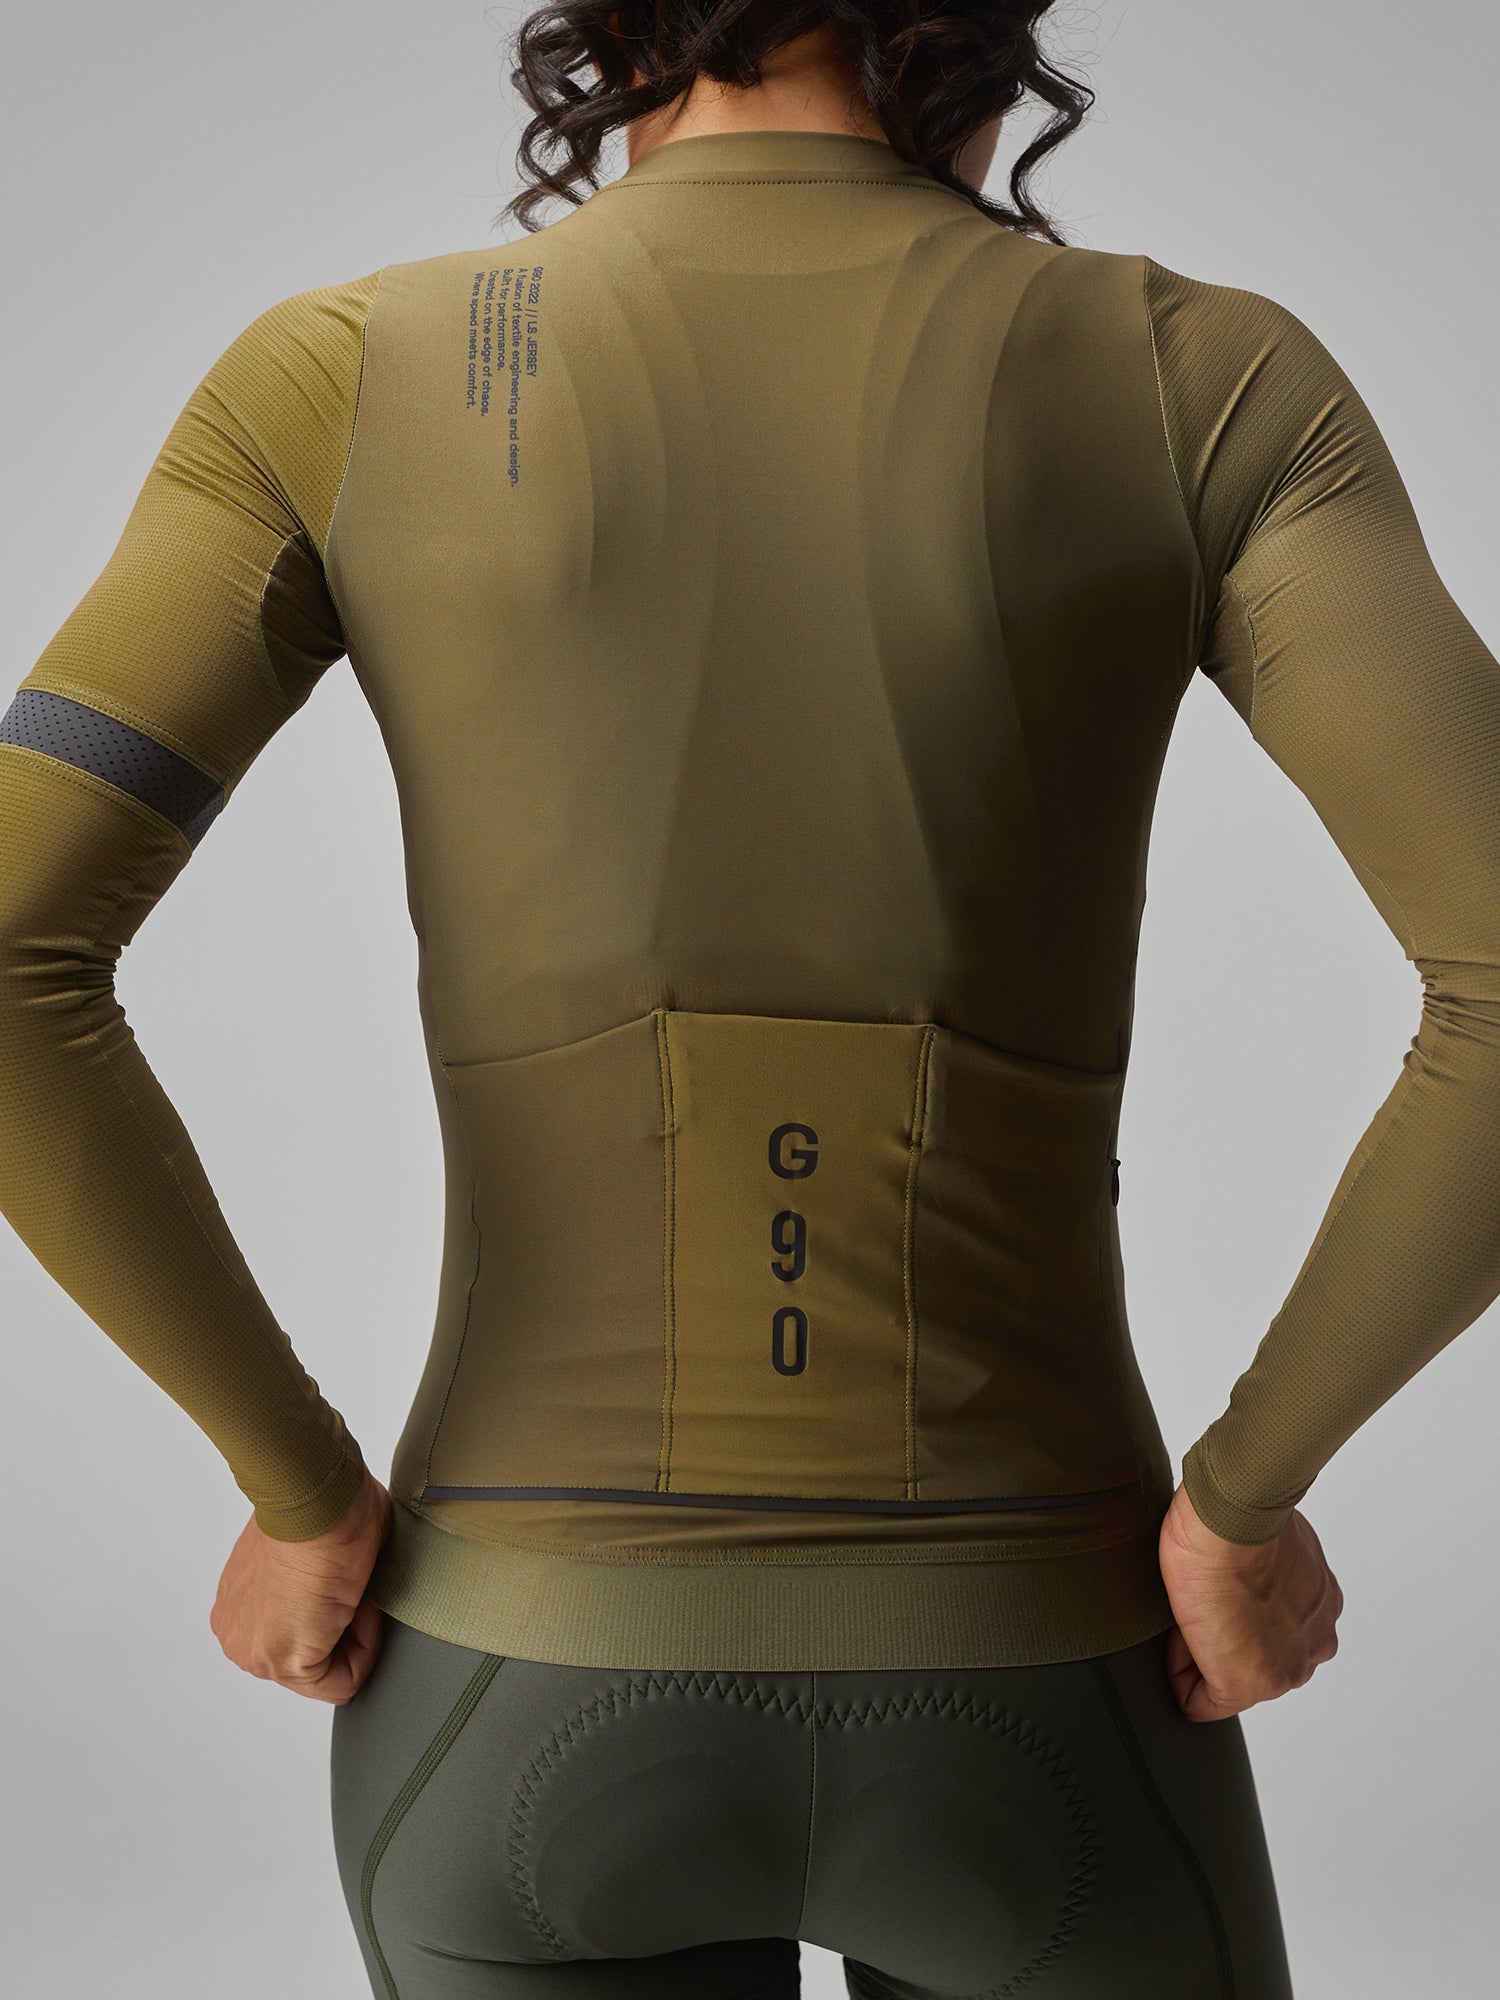 G90 L/S JERSEY EARTH